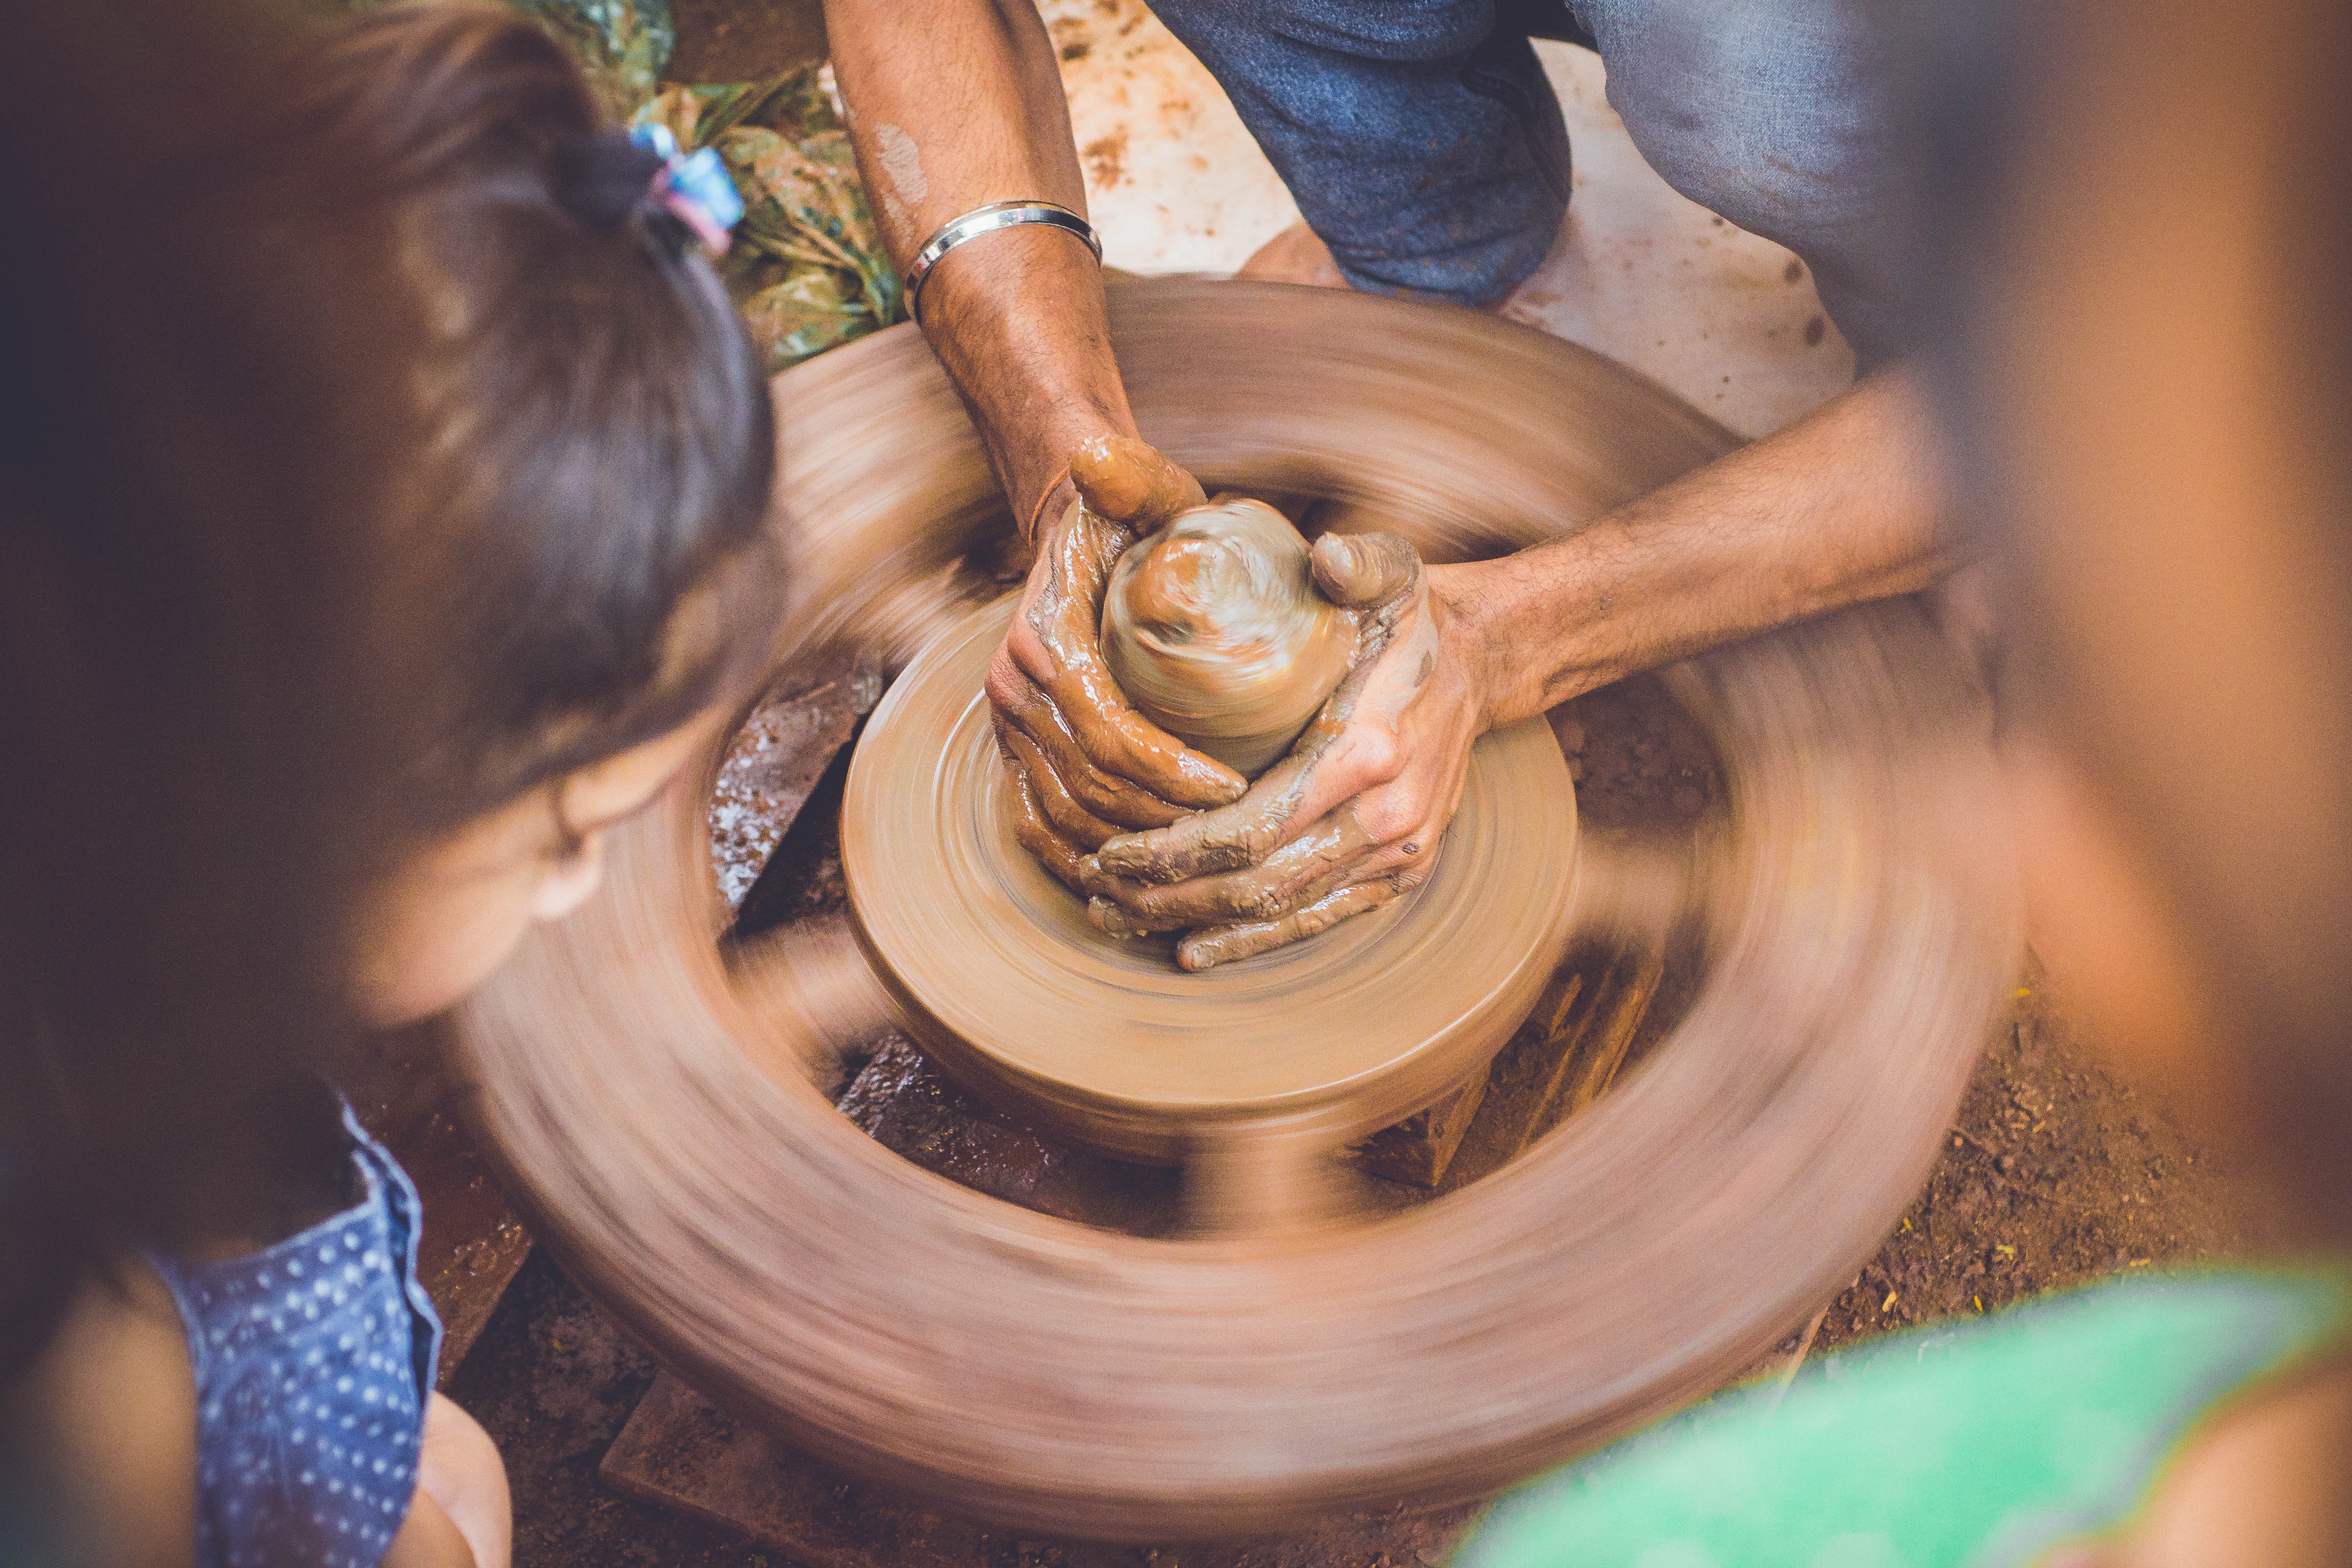 Am image of pottery making representing skills required in the art of pottery